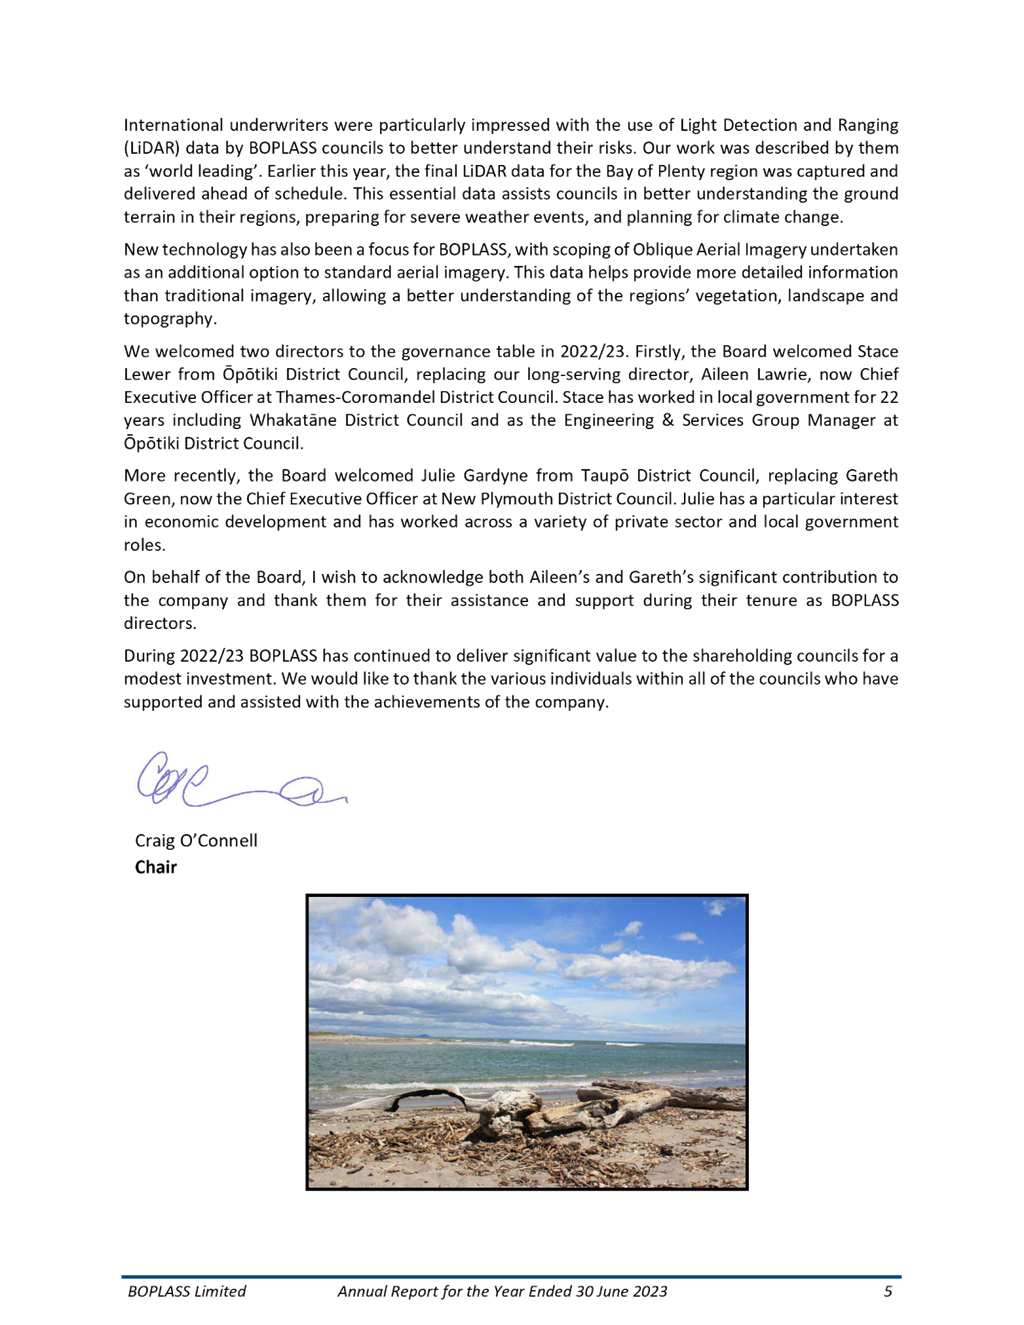 A document with a picture of a beach and blue sky

Description automatically generated